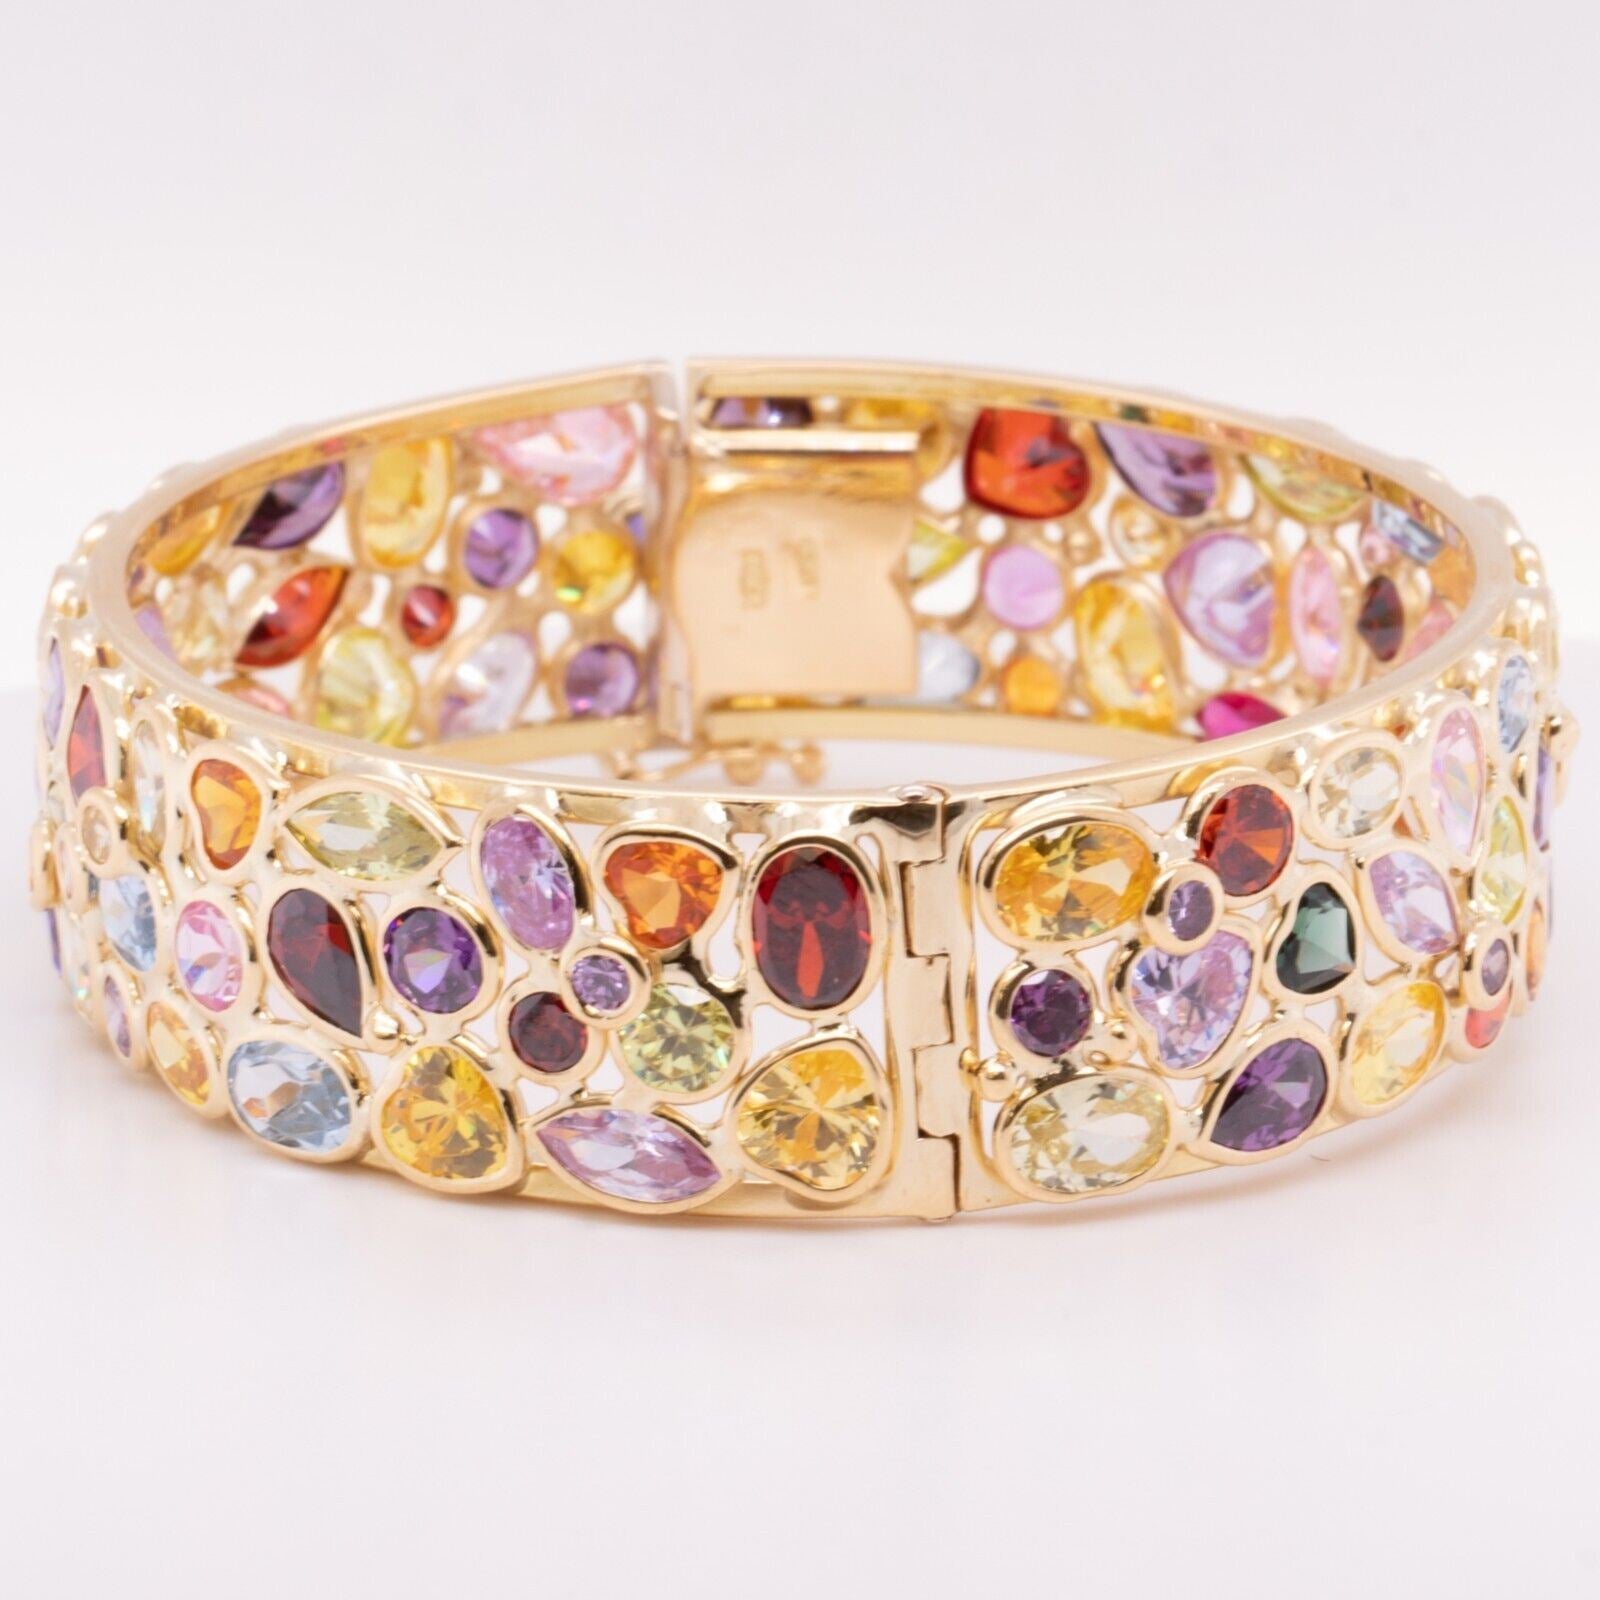 NEW! Touchstone Colorful Bangles Collection